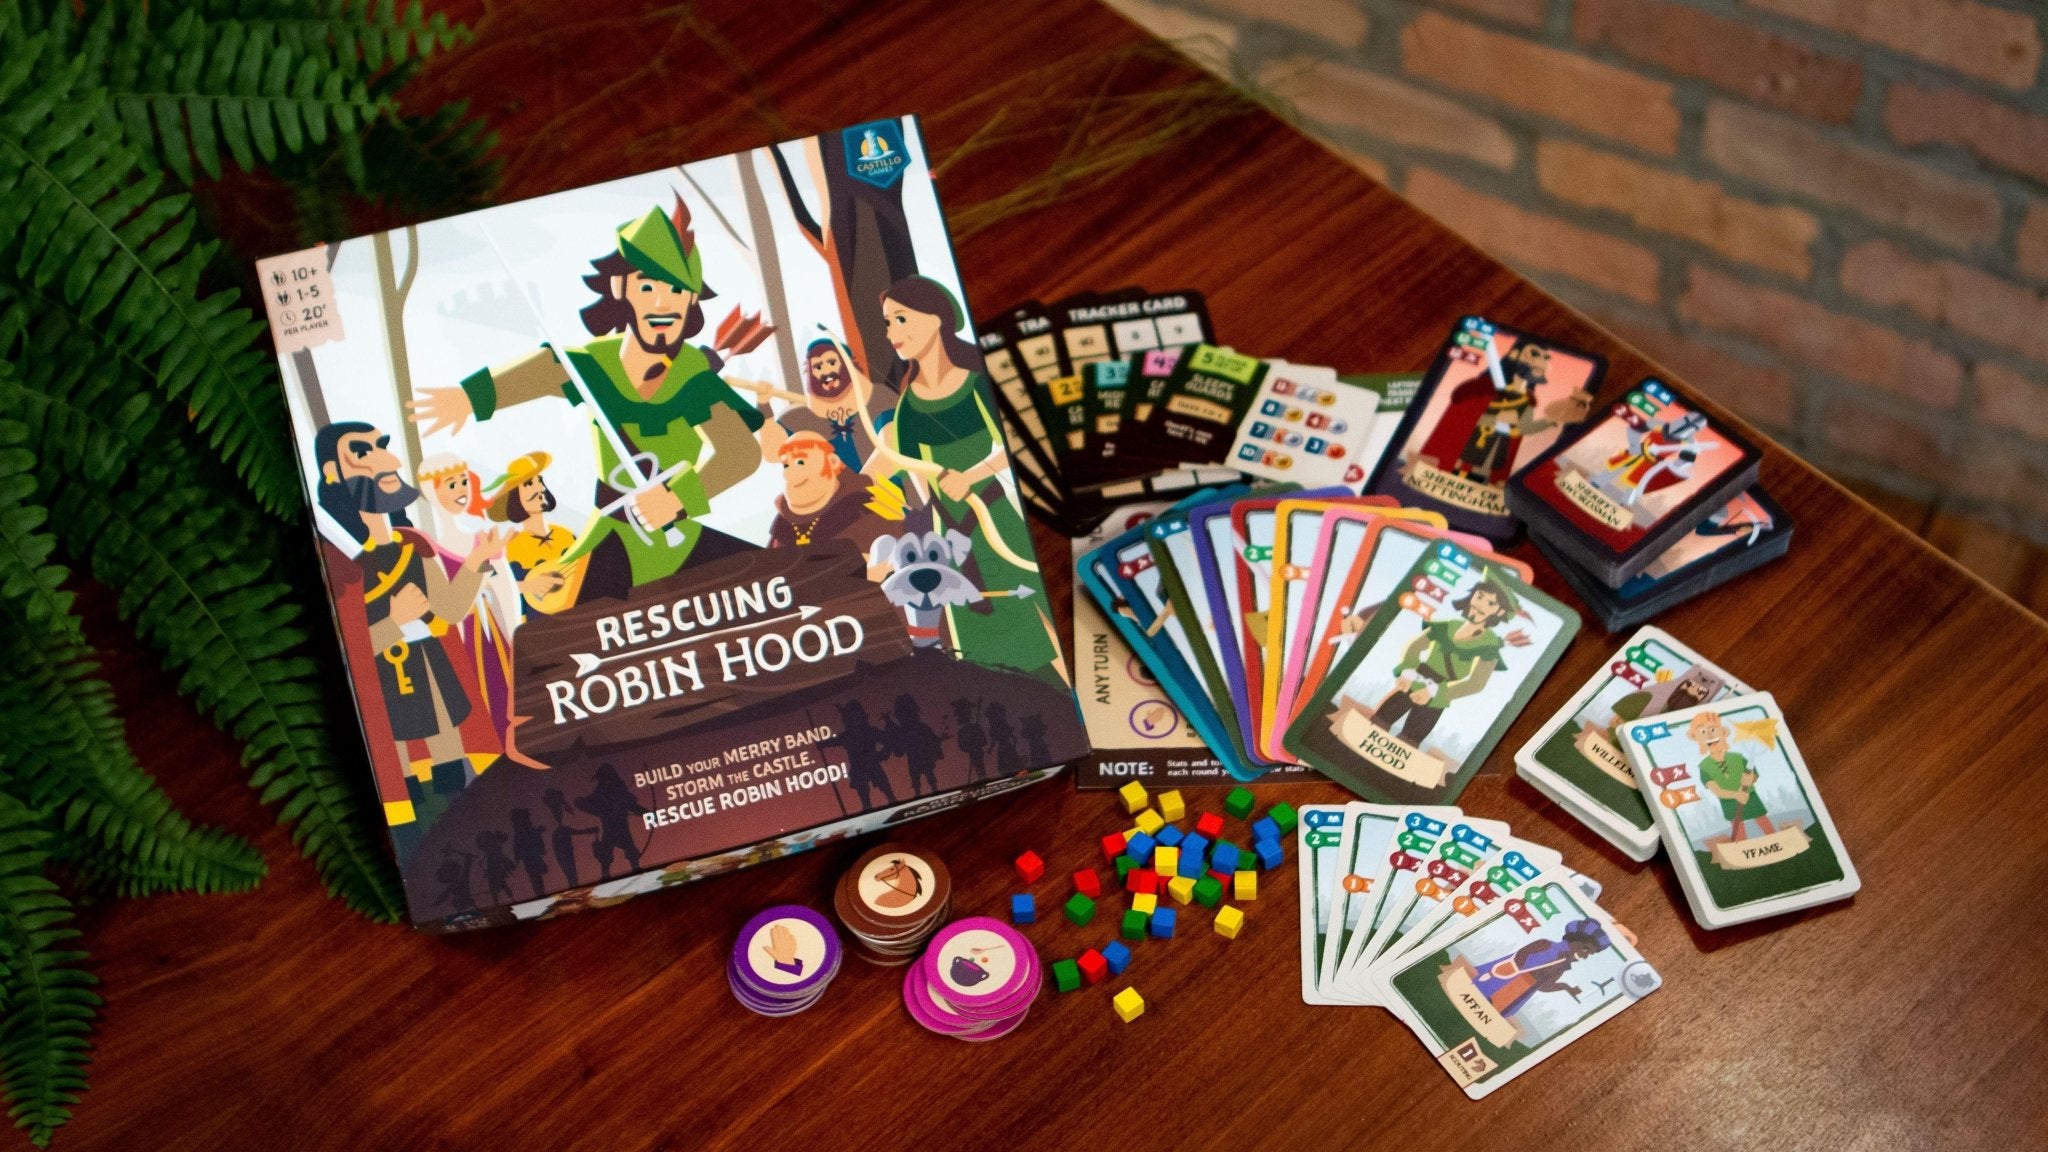 Rescuing Robin Hood (Base Game + Promo) - Gaming Library